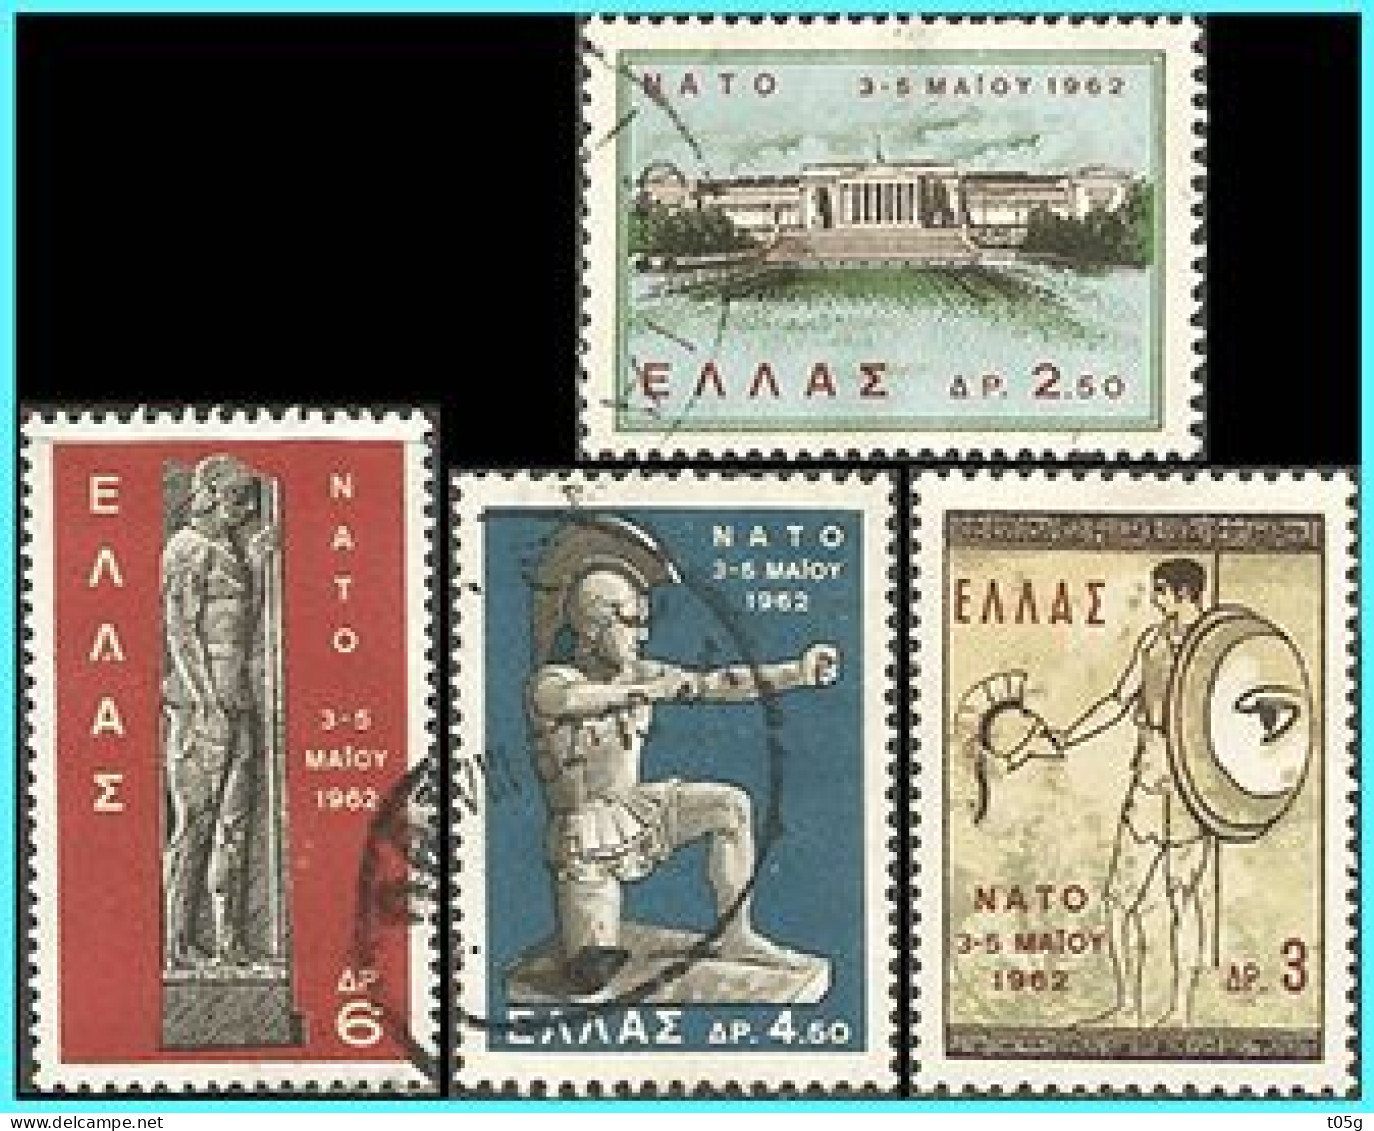 GREECE-GRECE- HELLAS 1962: "NATO" Compl. Set Used - Used Stamps